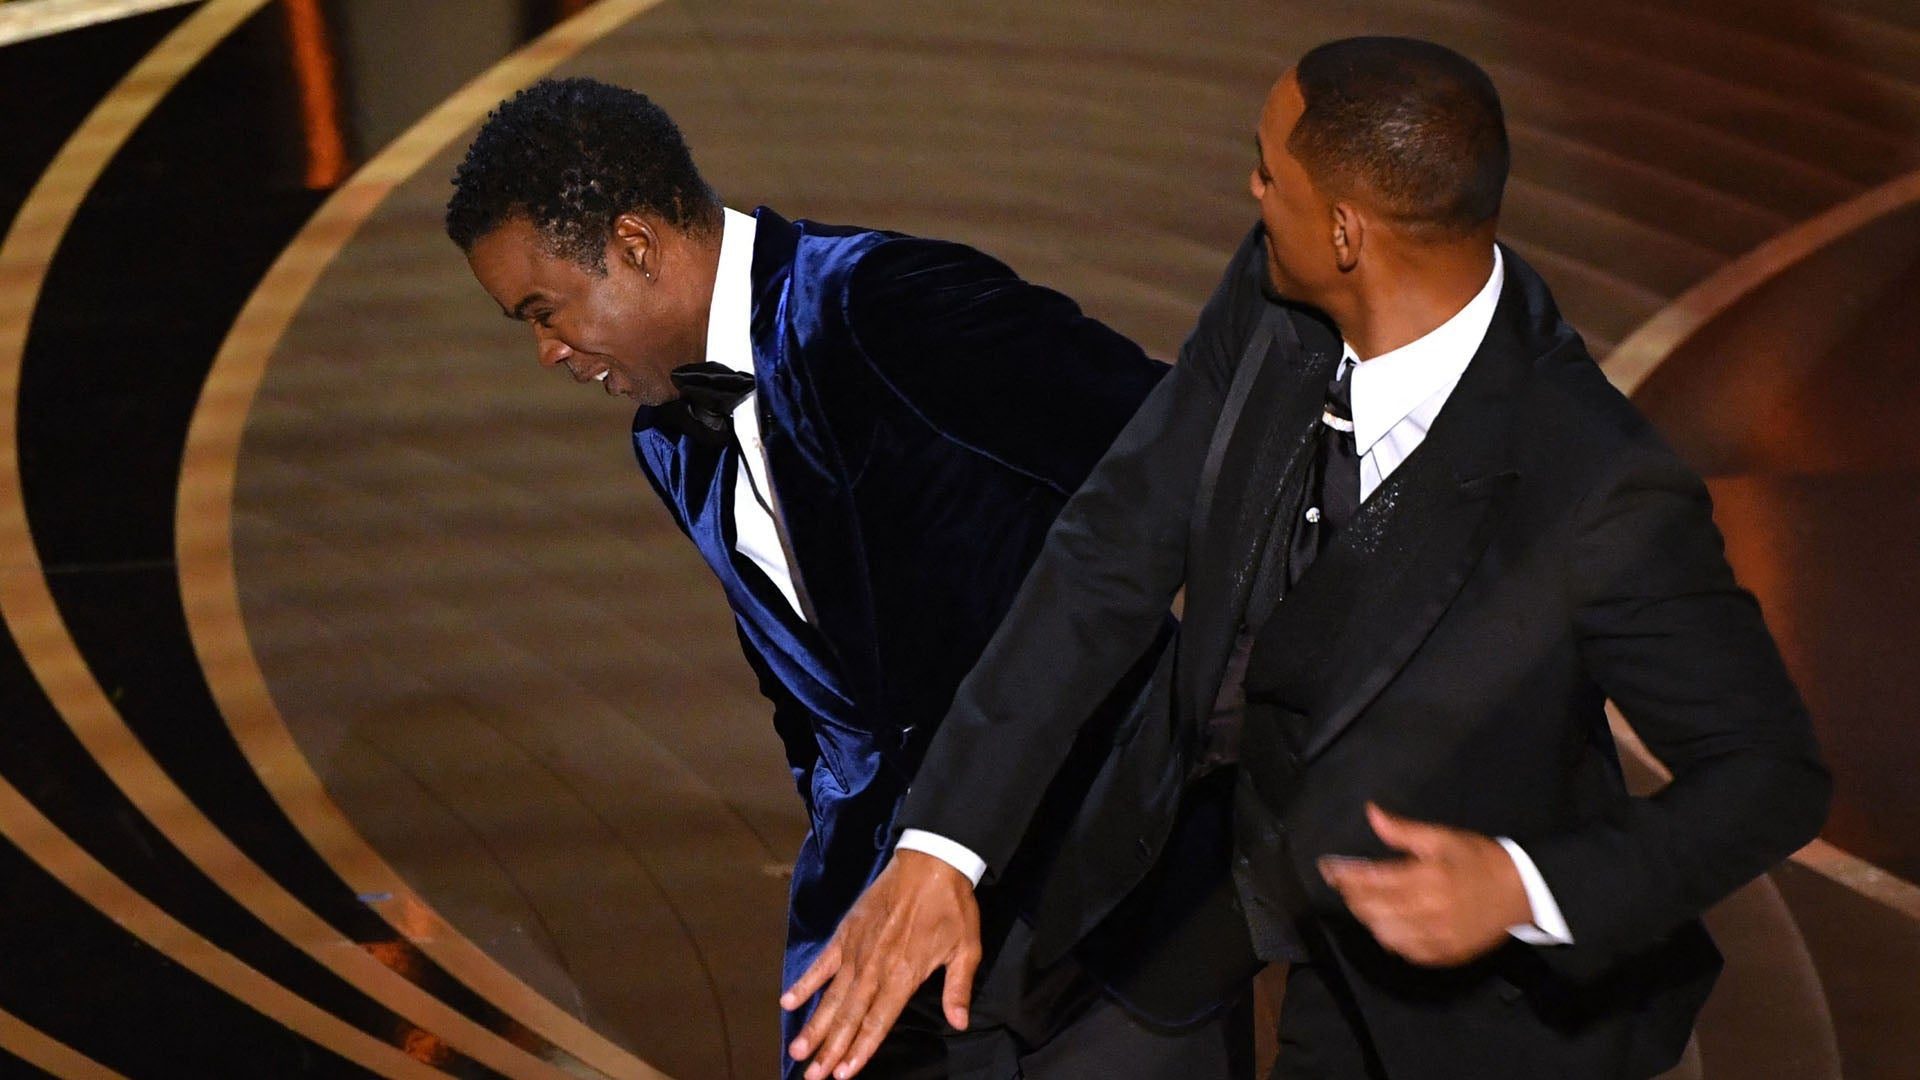 Jaden Smith reacts after his dad Will Smith slapped Chris Rock